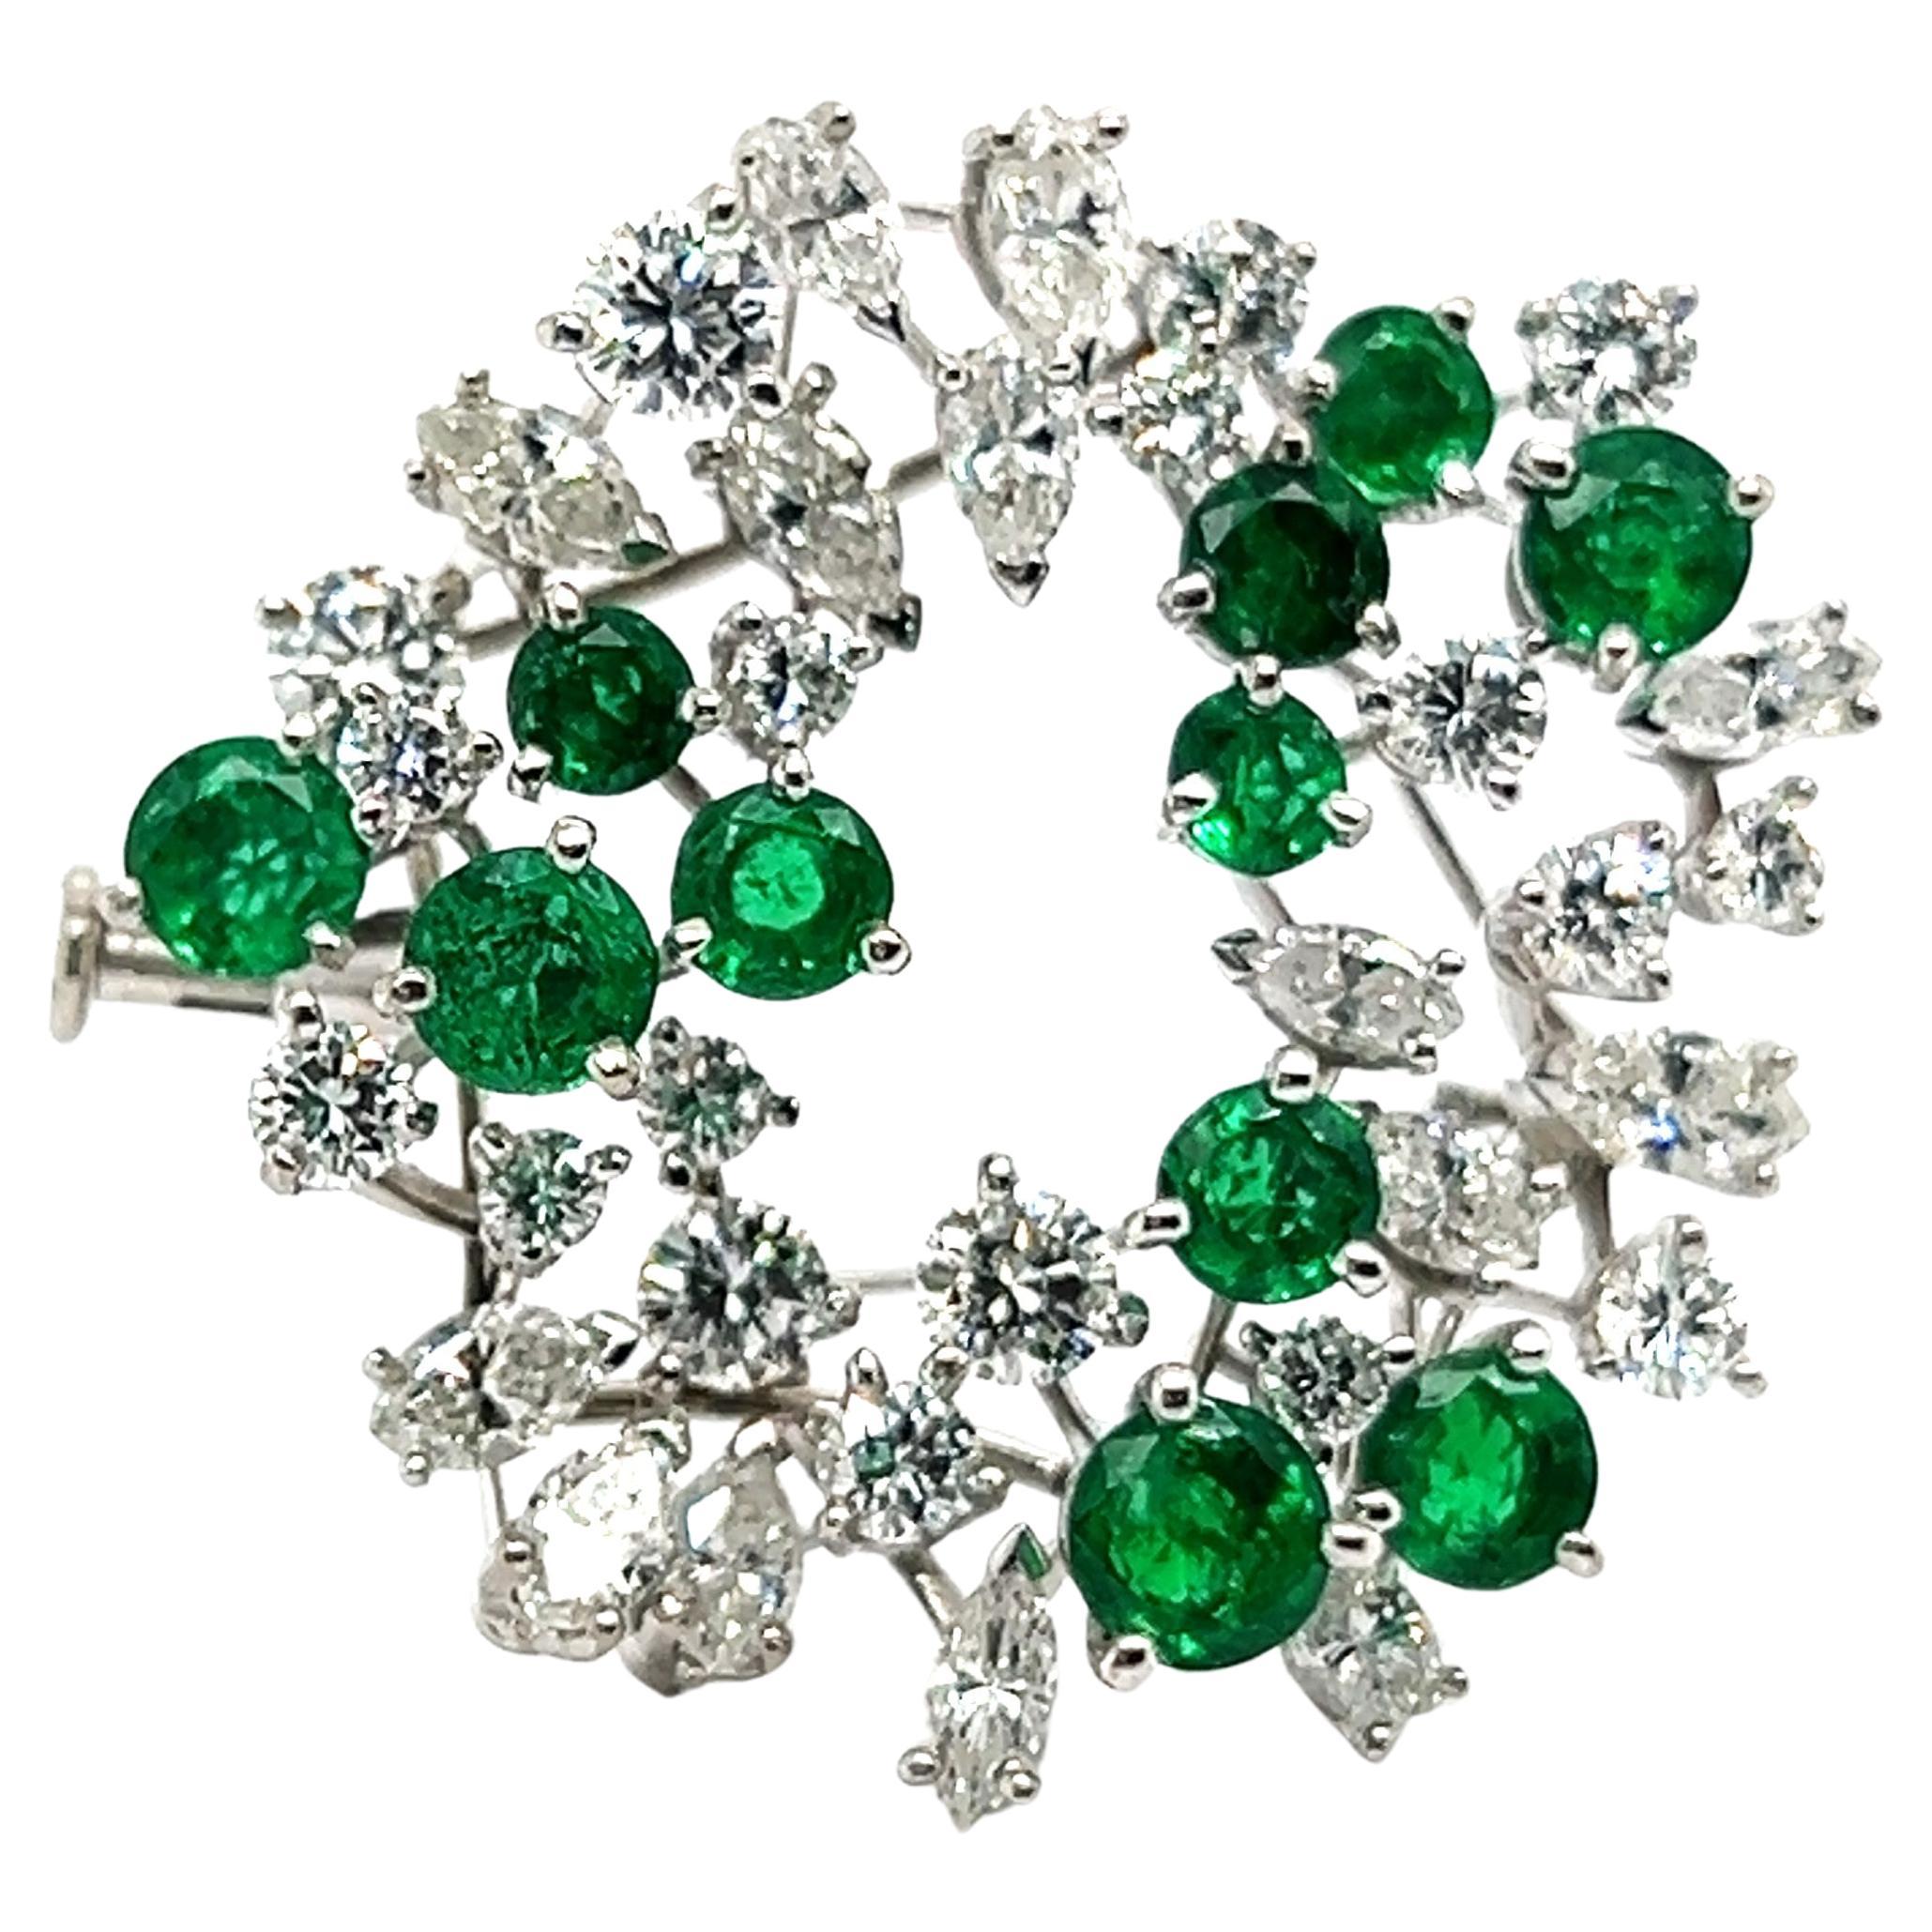 Brooch with Emeralds & Diamonds in 18 Karat White Gold by Meister